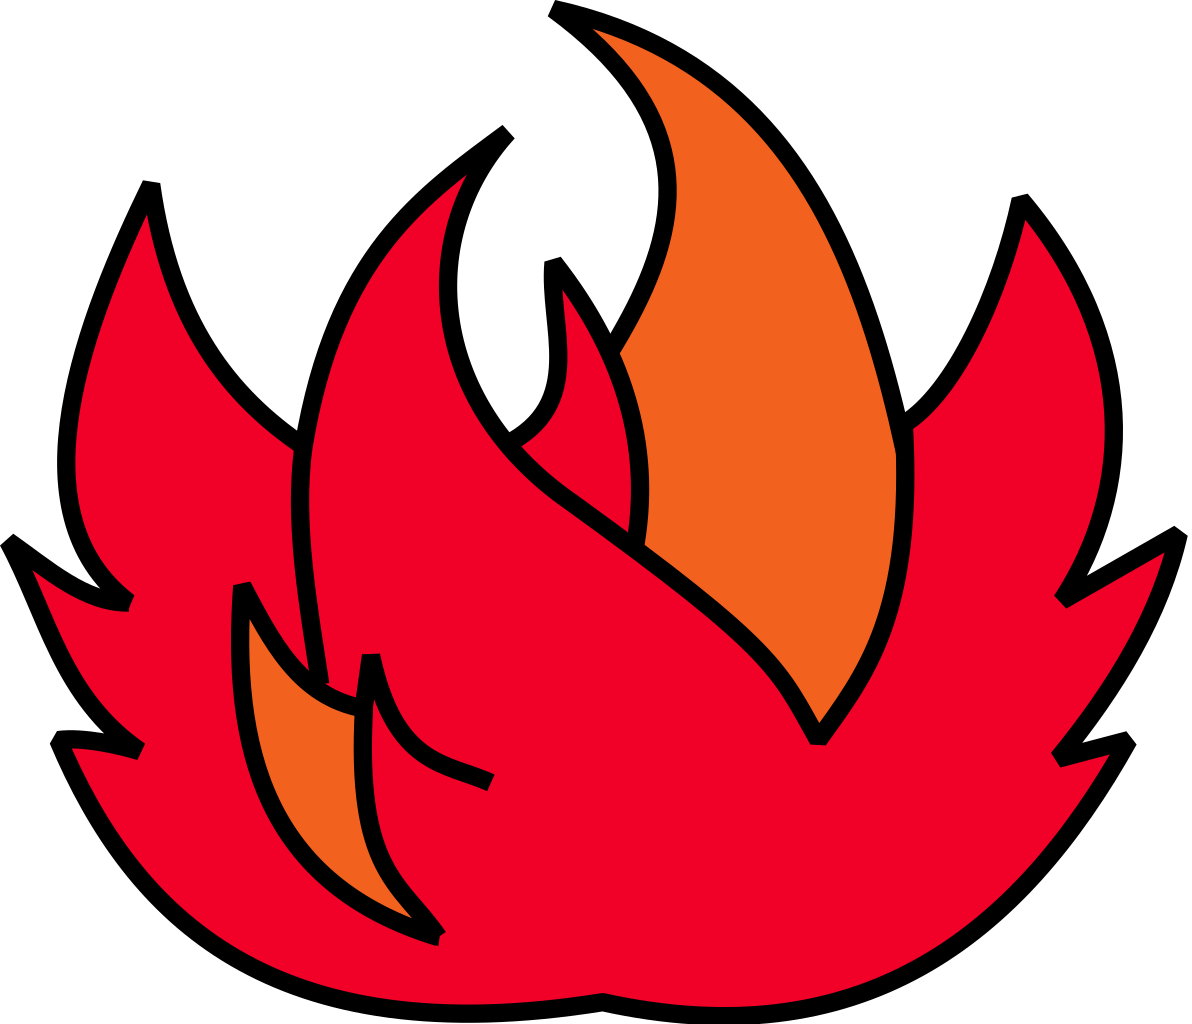 Stylized Phoenix Flame Graphic PNG